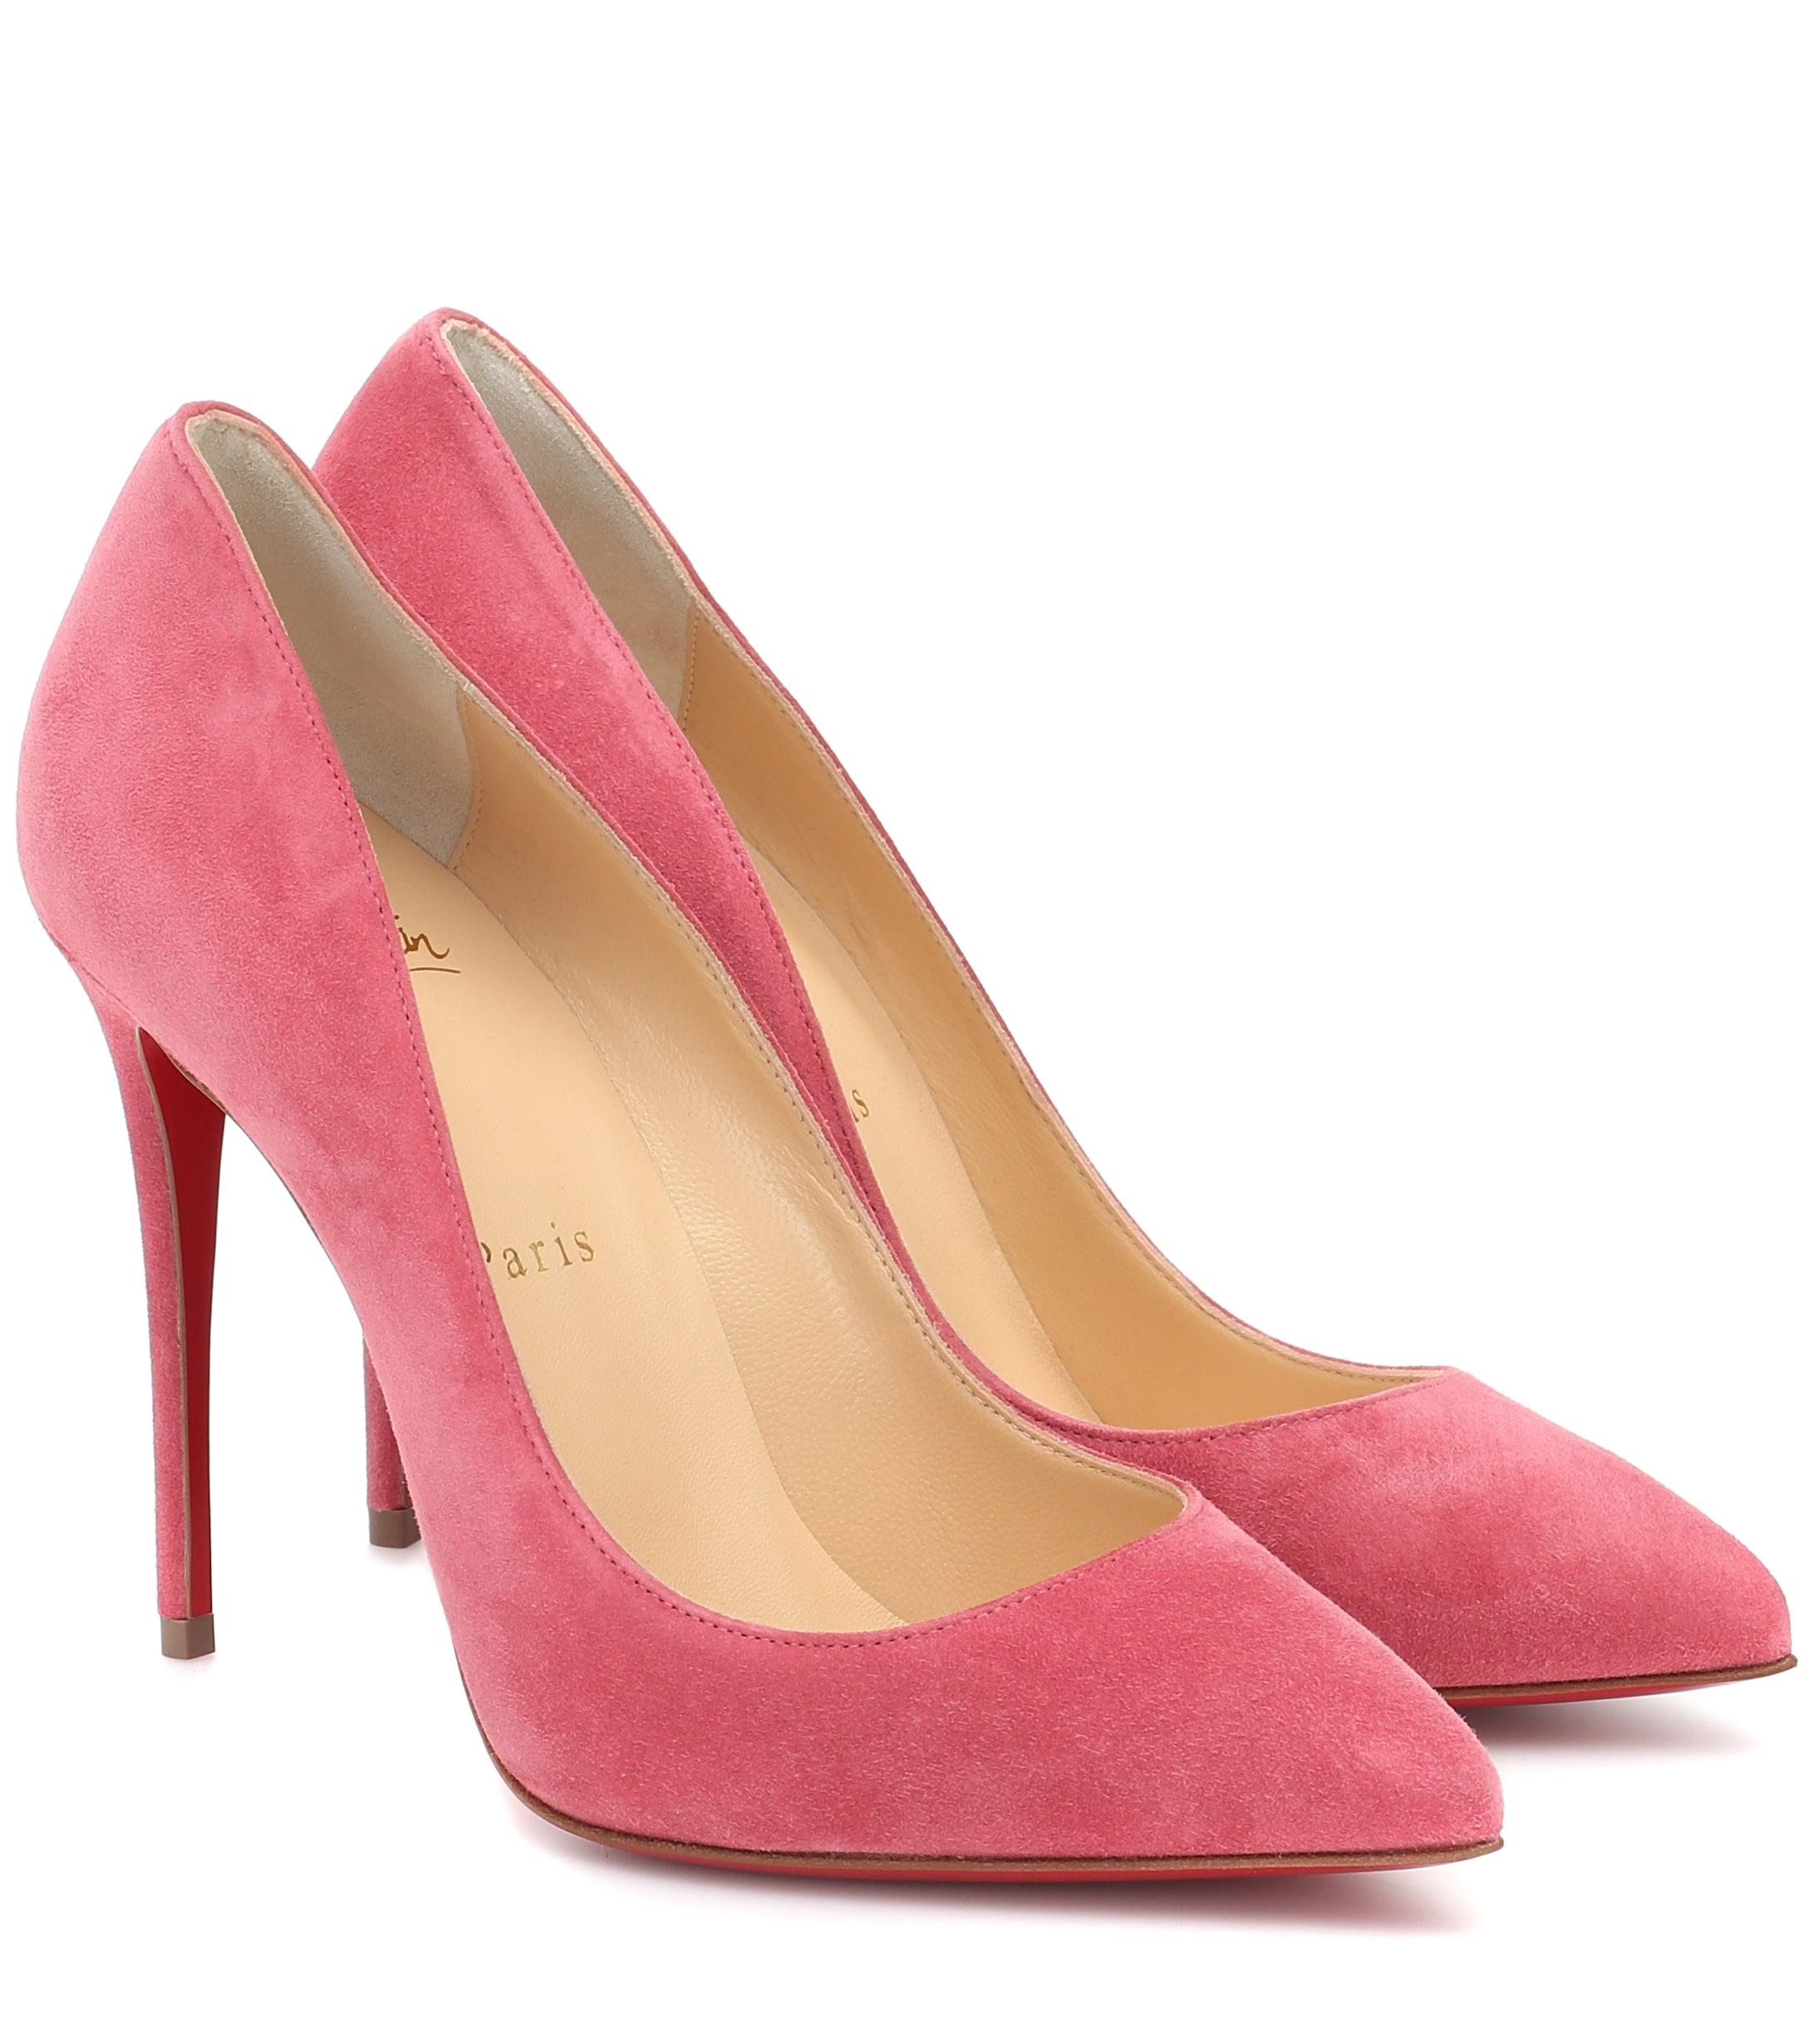 Christian Louboutin Pigalle Follies 100 Suede Pumps in Pink - Lyst